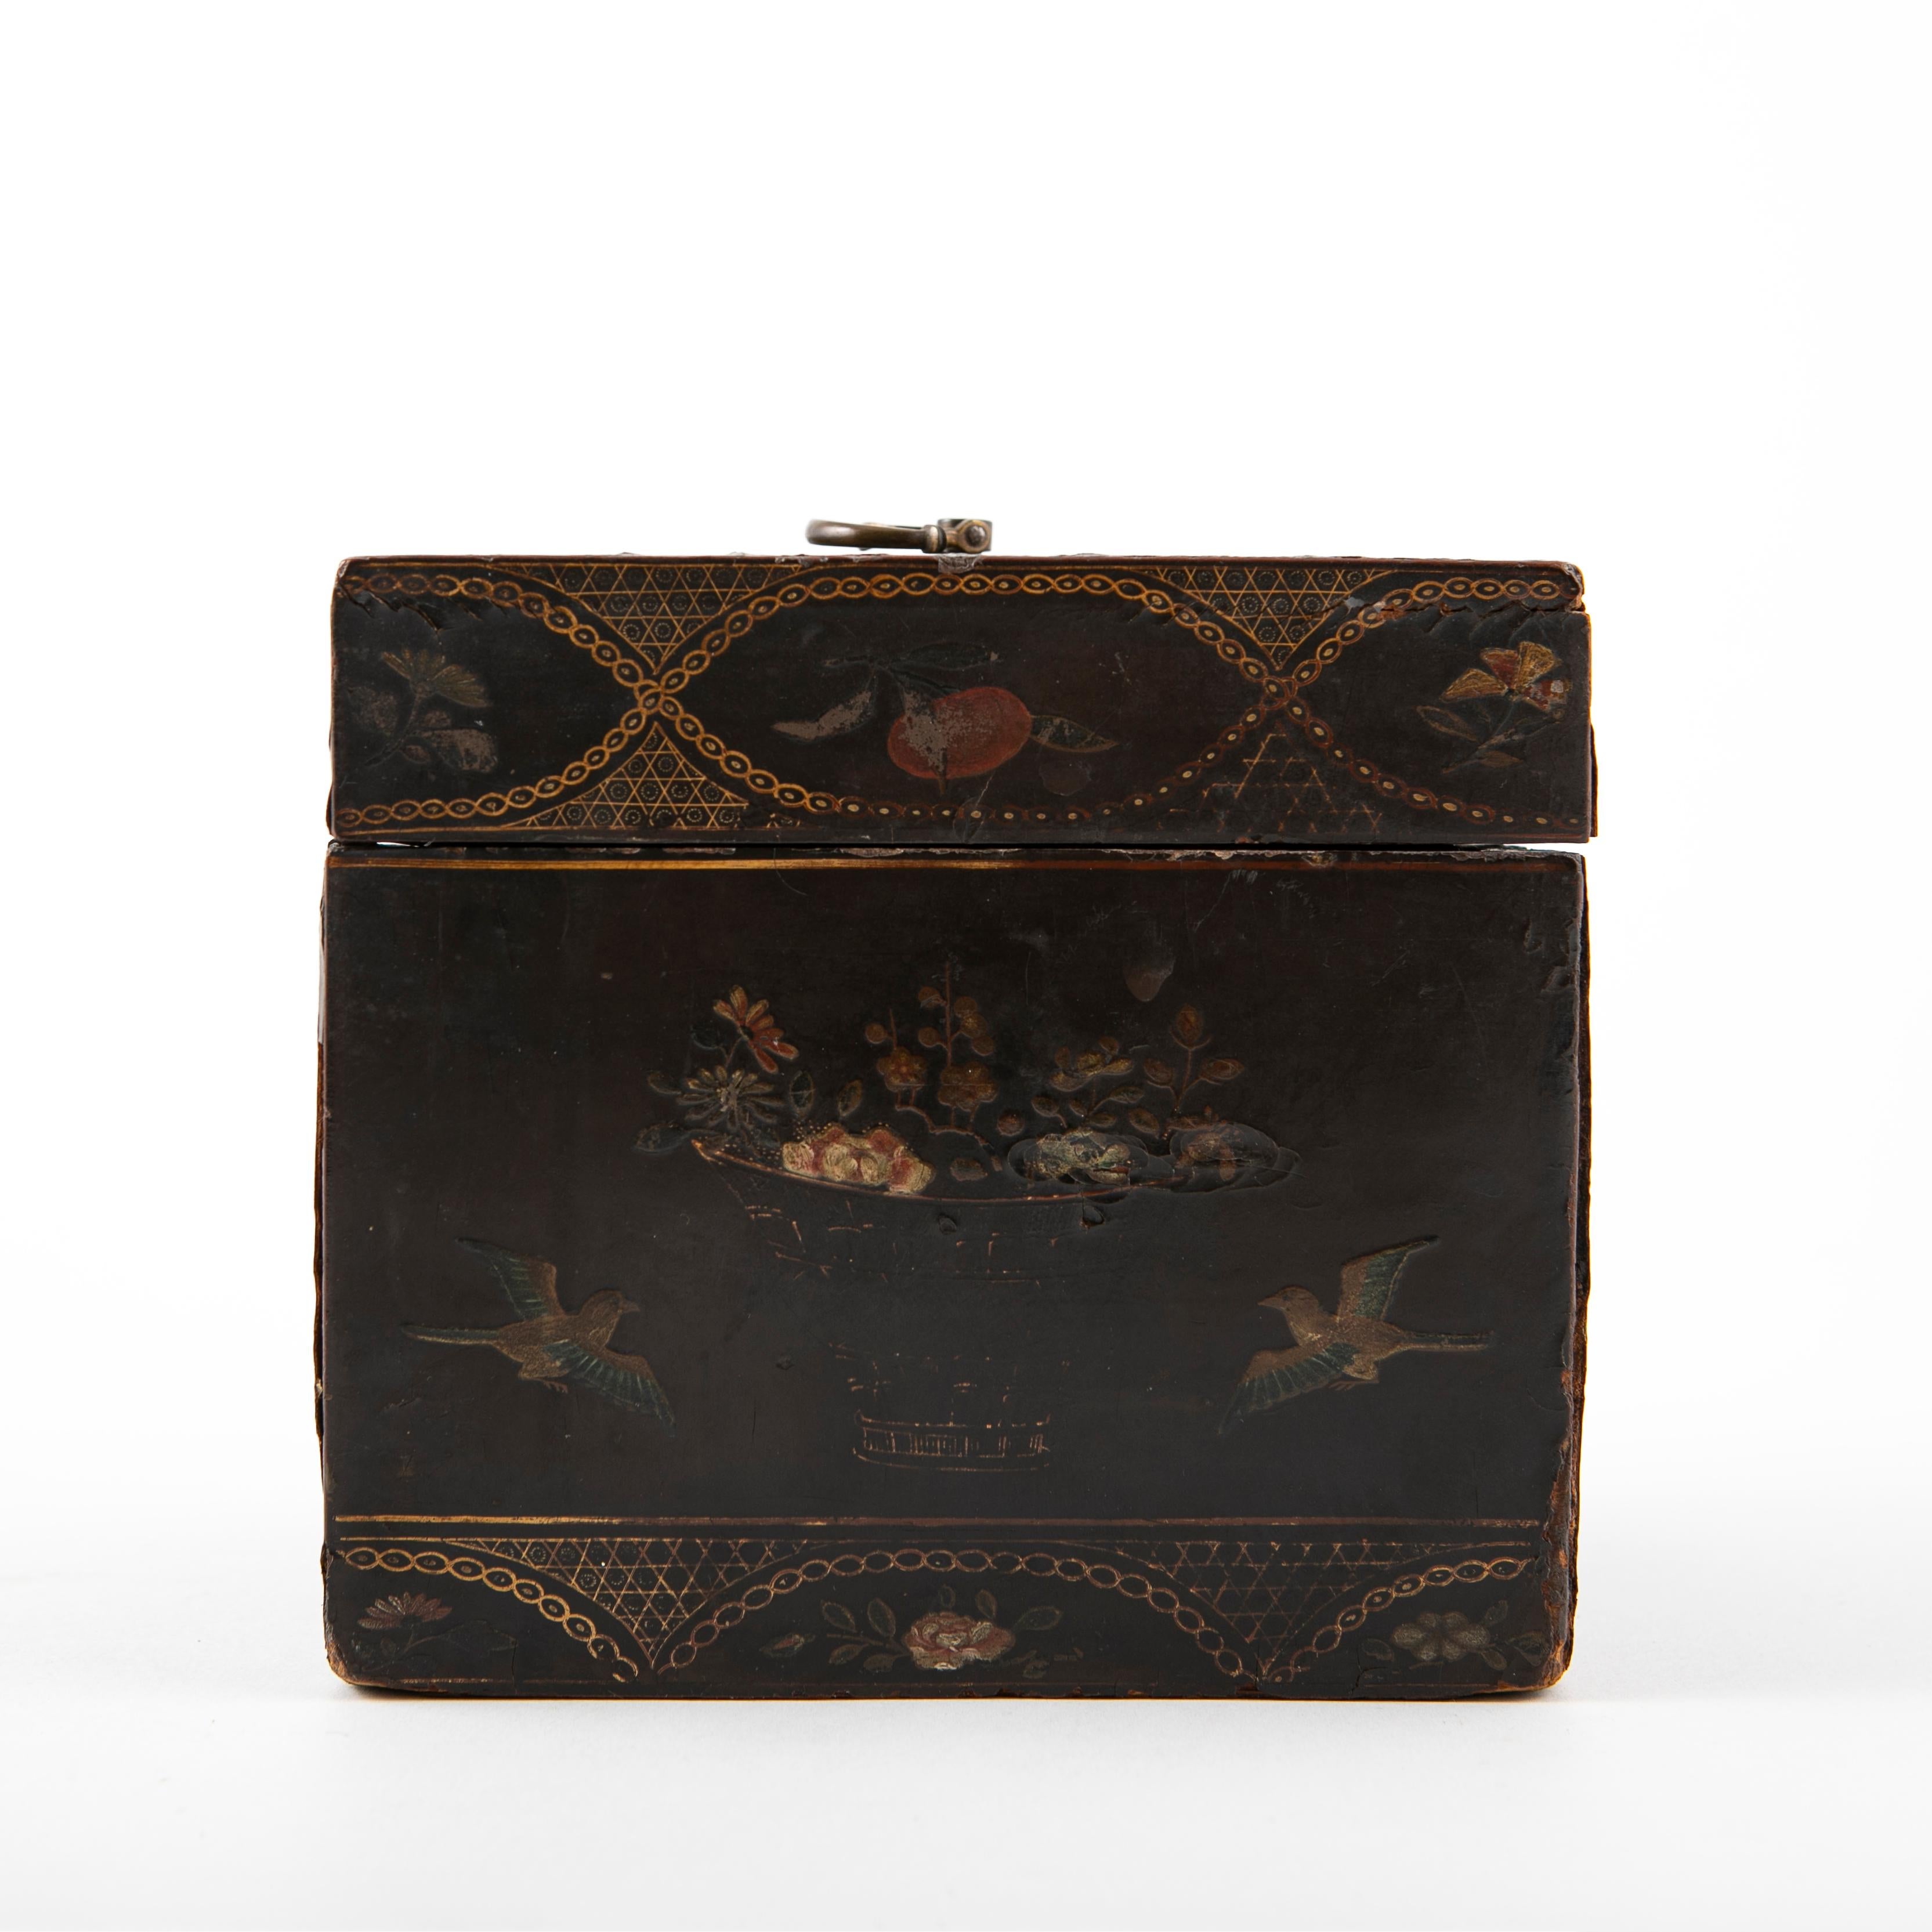 Tea Caddy in Black Lacquer with Floral Decorations 7